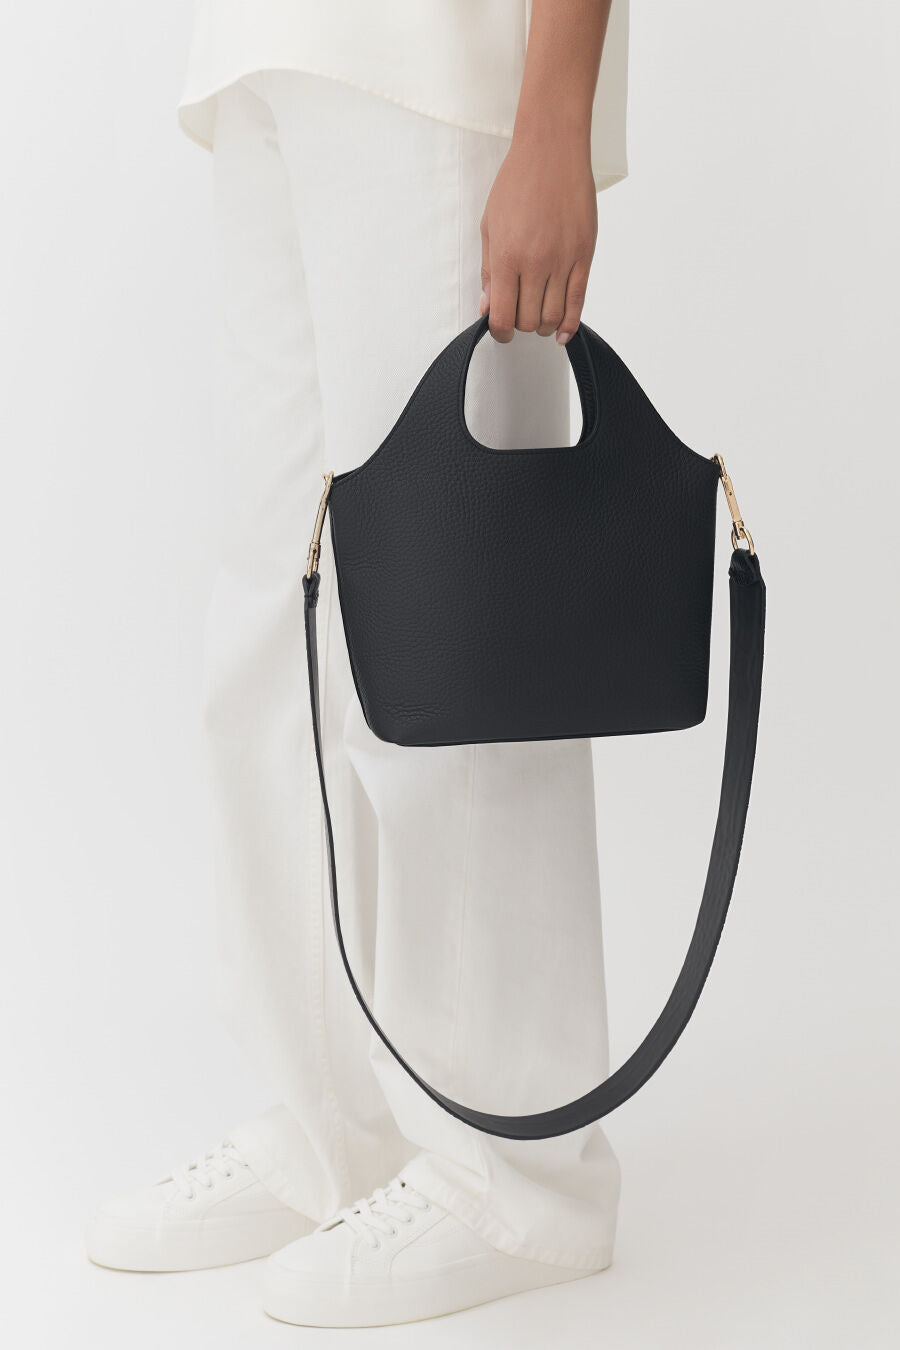 Person holding a handbag with a shoulder strap.